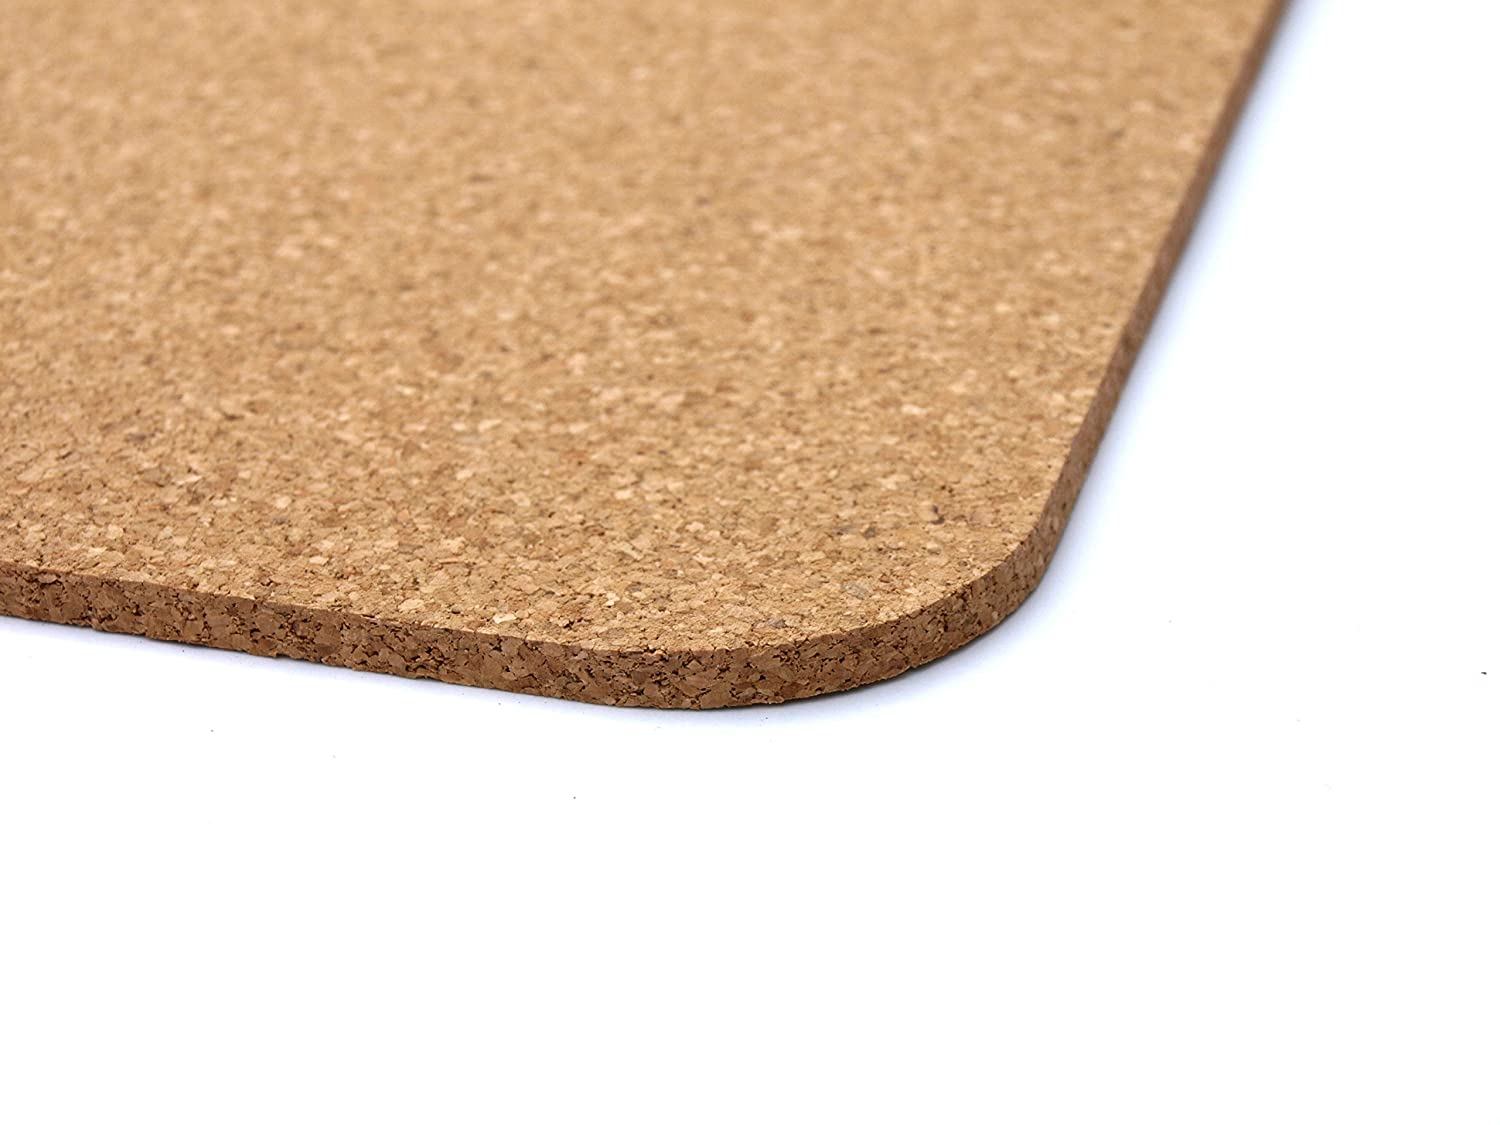 Cork table mats 5mm under a plate 300x400mm - 6 pcs. - Cork placemats and  coasters - Experts in cork products!